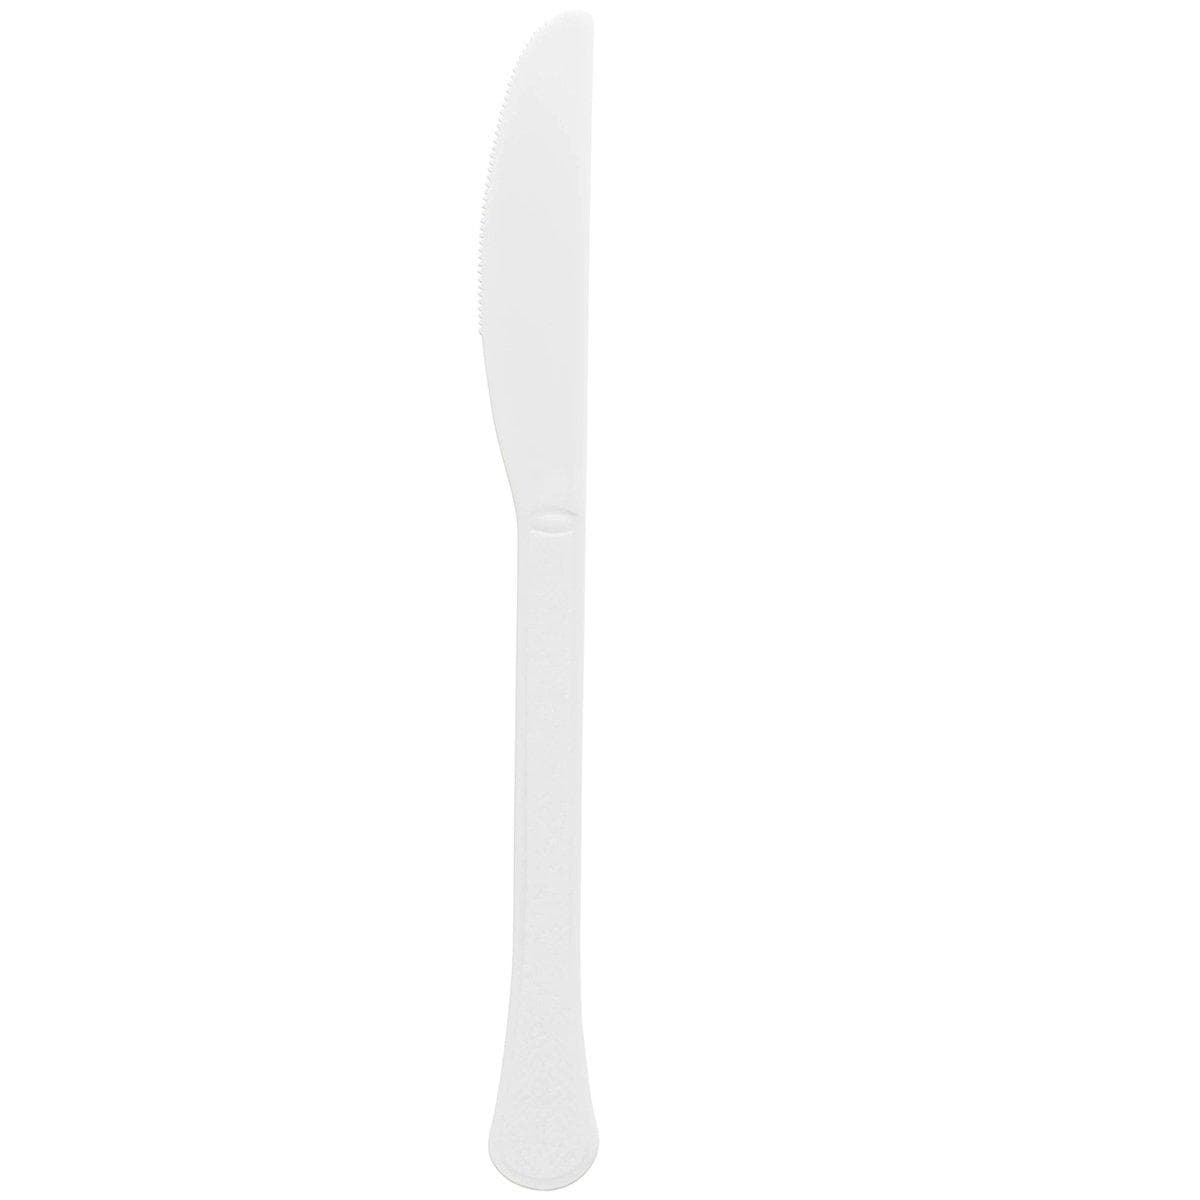 Buy Plasticware Frosty White Plastic Knives, 20 Count sold at Party Expert